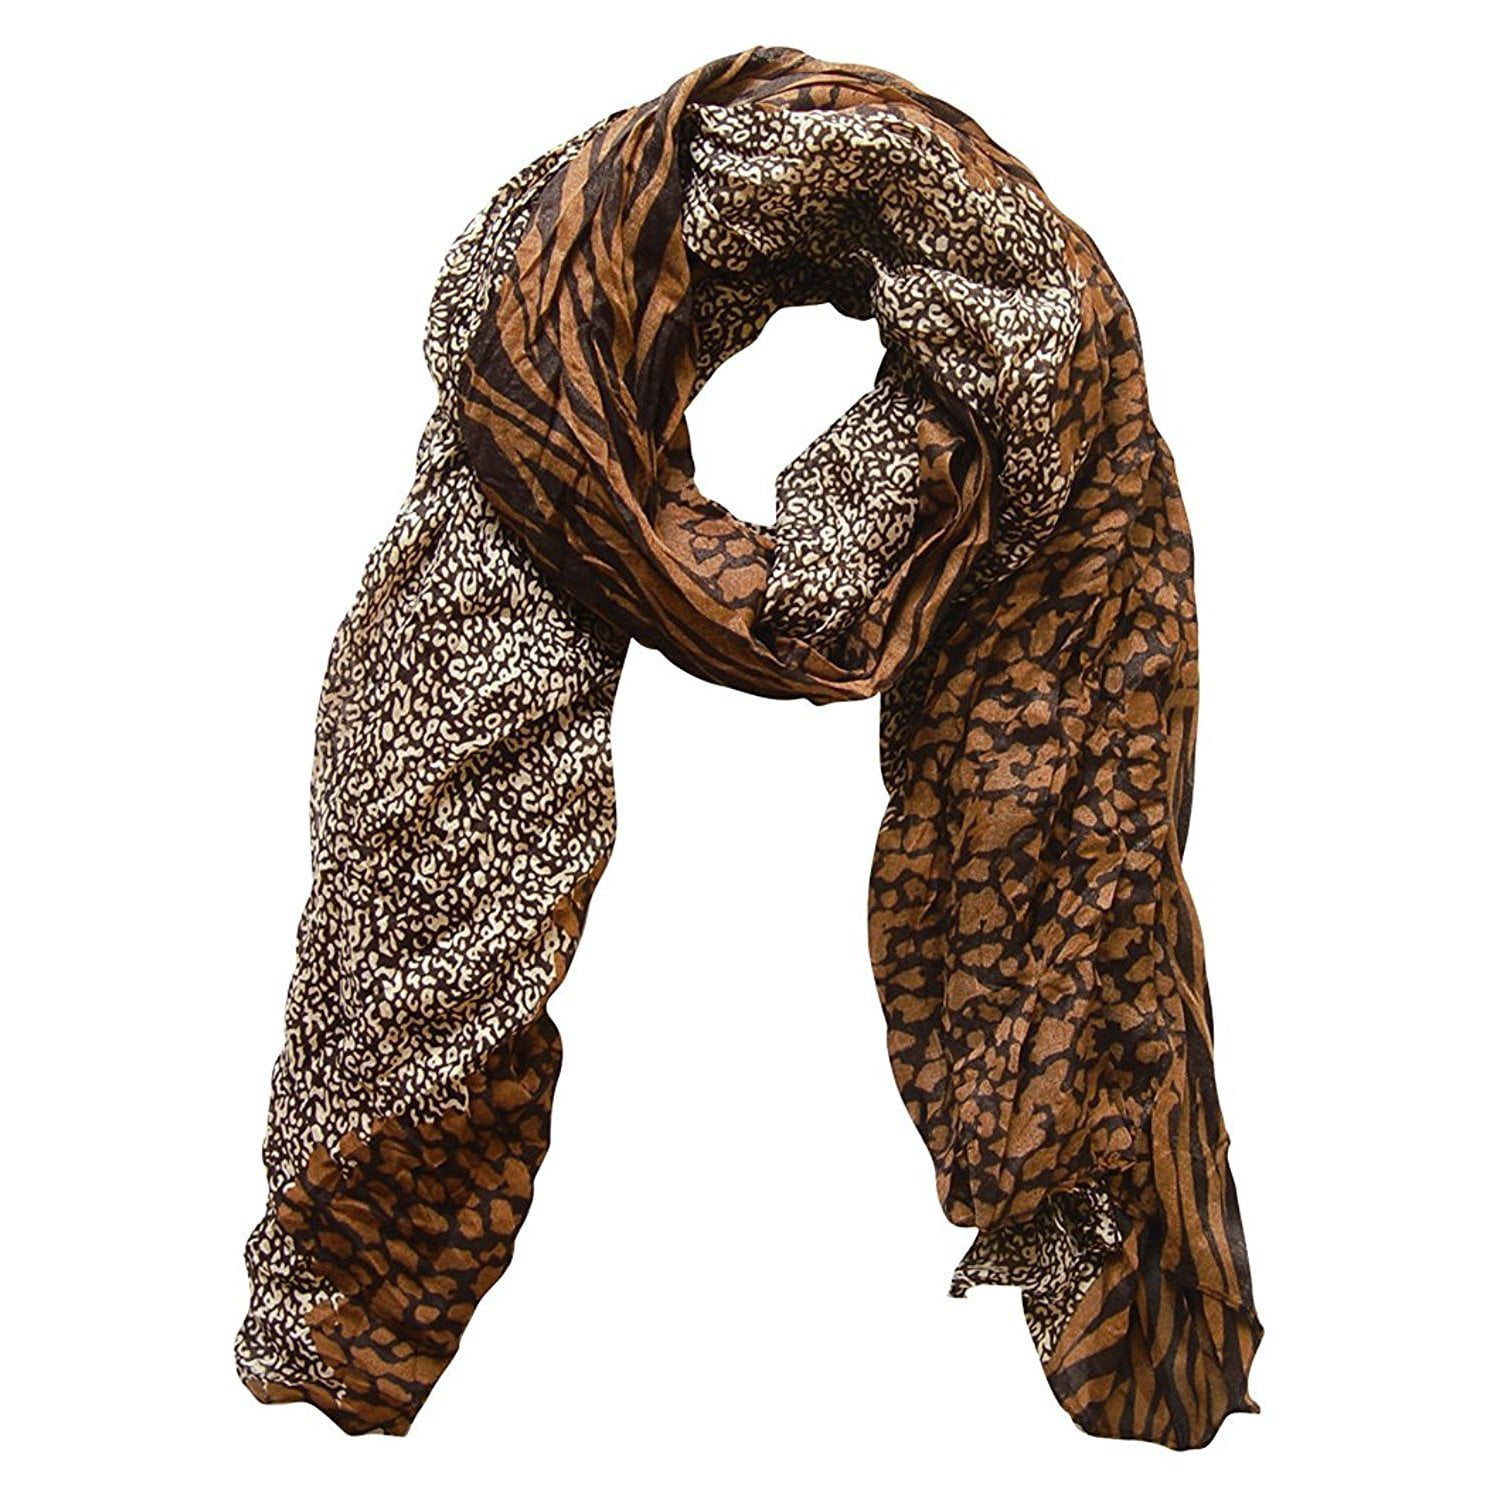 Women Leopard and Zebra Scarf Combi Printed Light Weight Long Scarves 